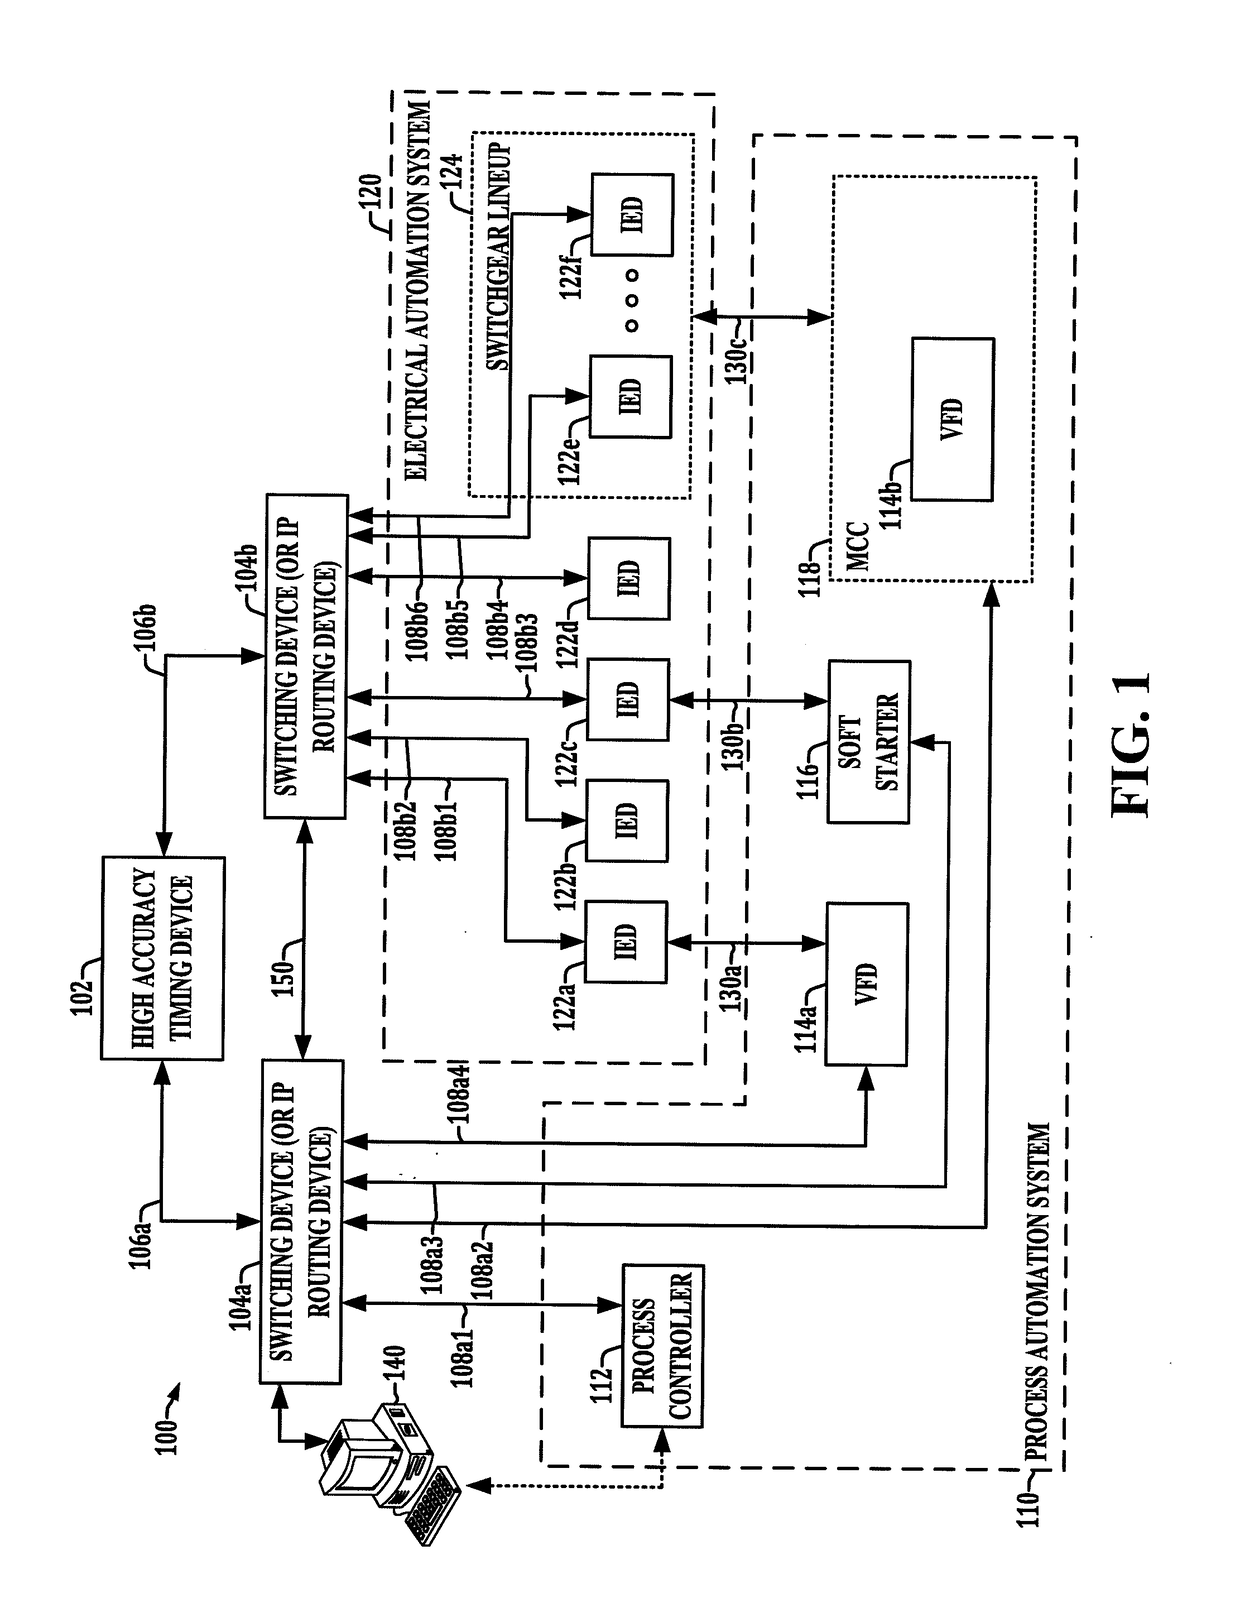 Apparatus to interface process automation and electrical automation systems